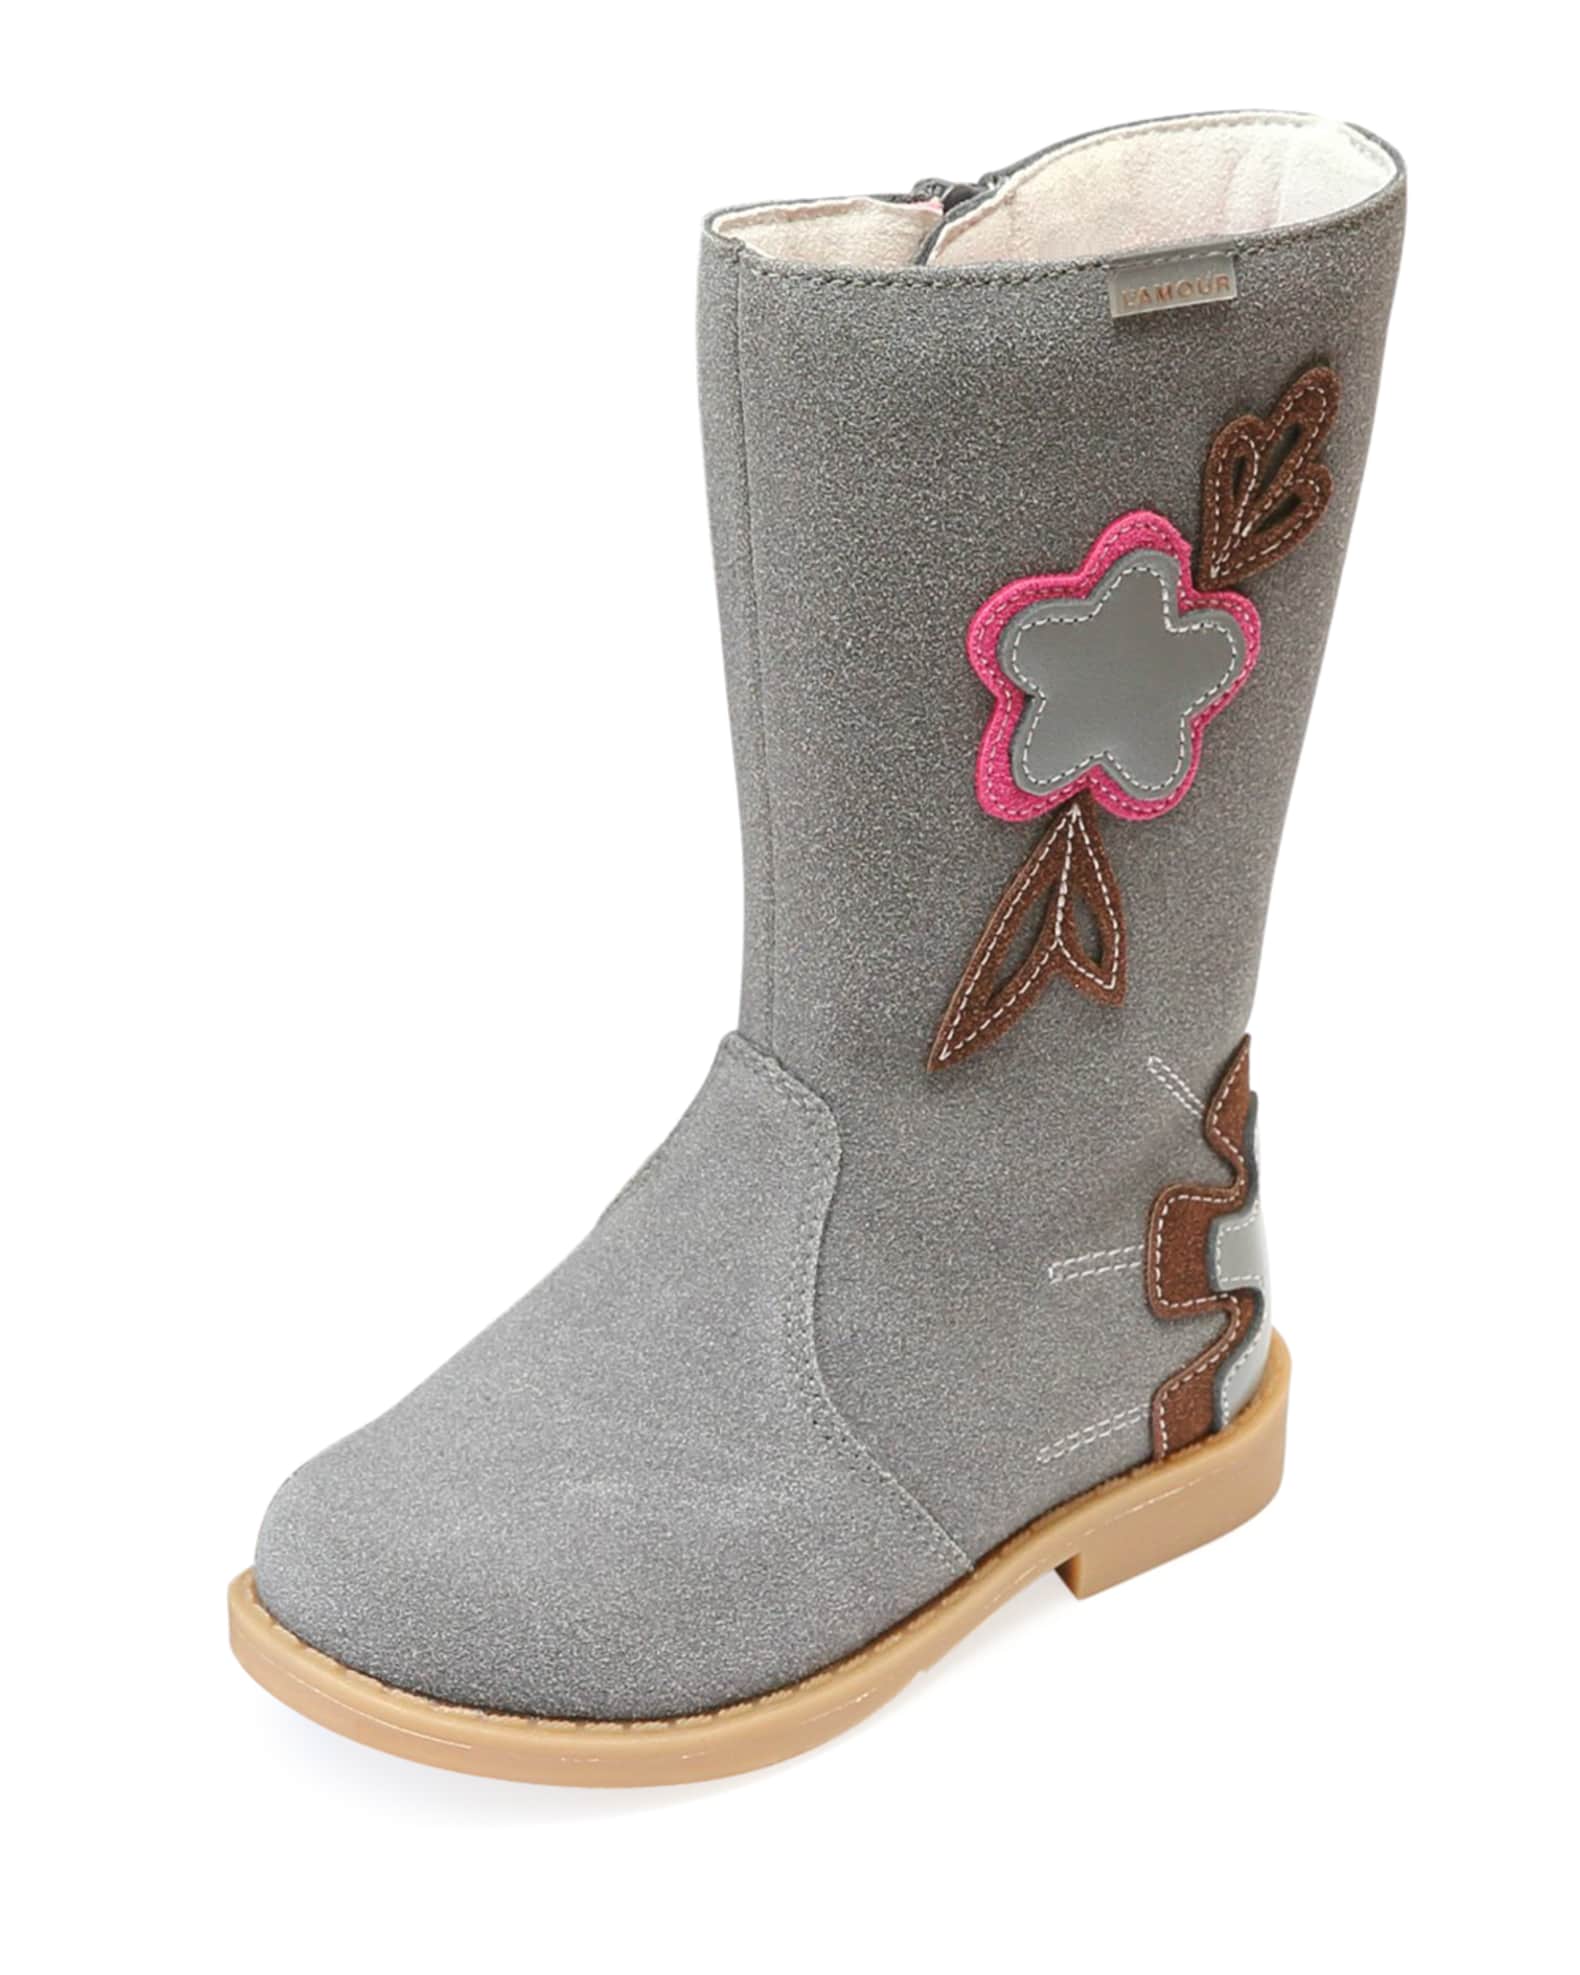 L'Amour Shoes Fiore Tall Fashion Boot w/ Stitch Flowers, Baby/Toddler ...